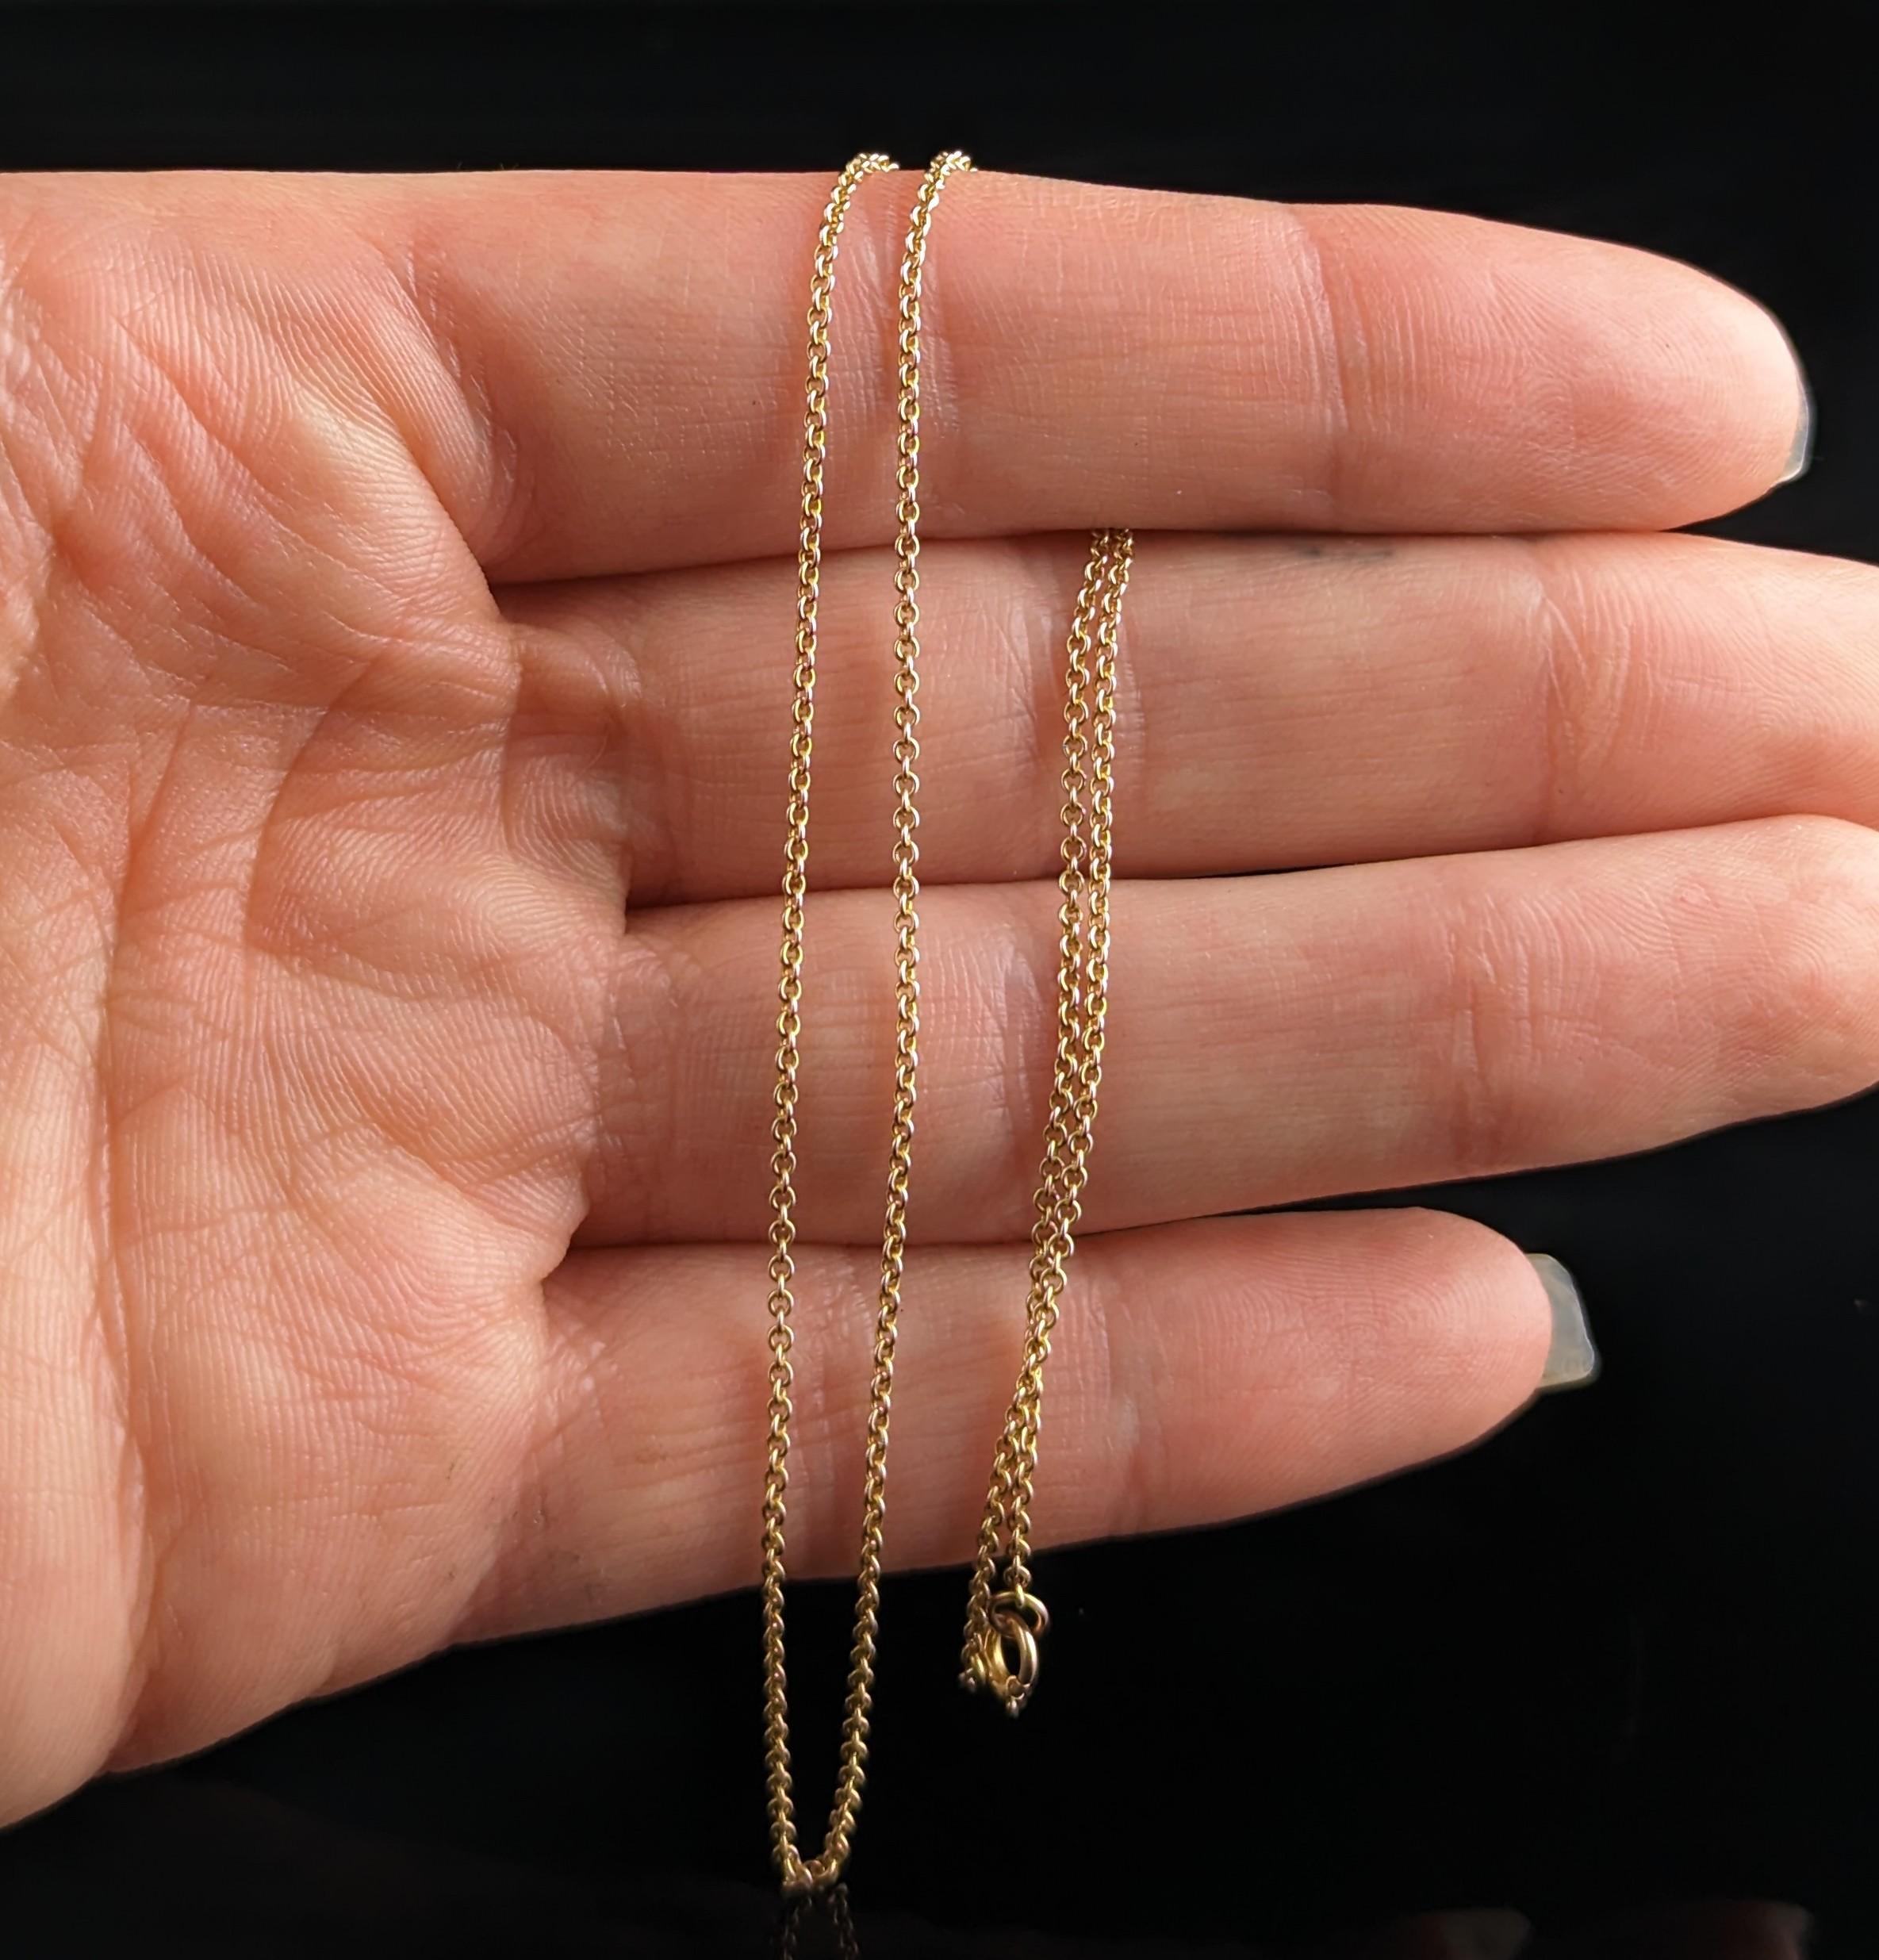 Women's Antique 9k Yellow Gold Dainty Trace Link Chain Necklace